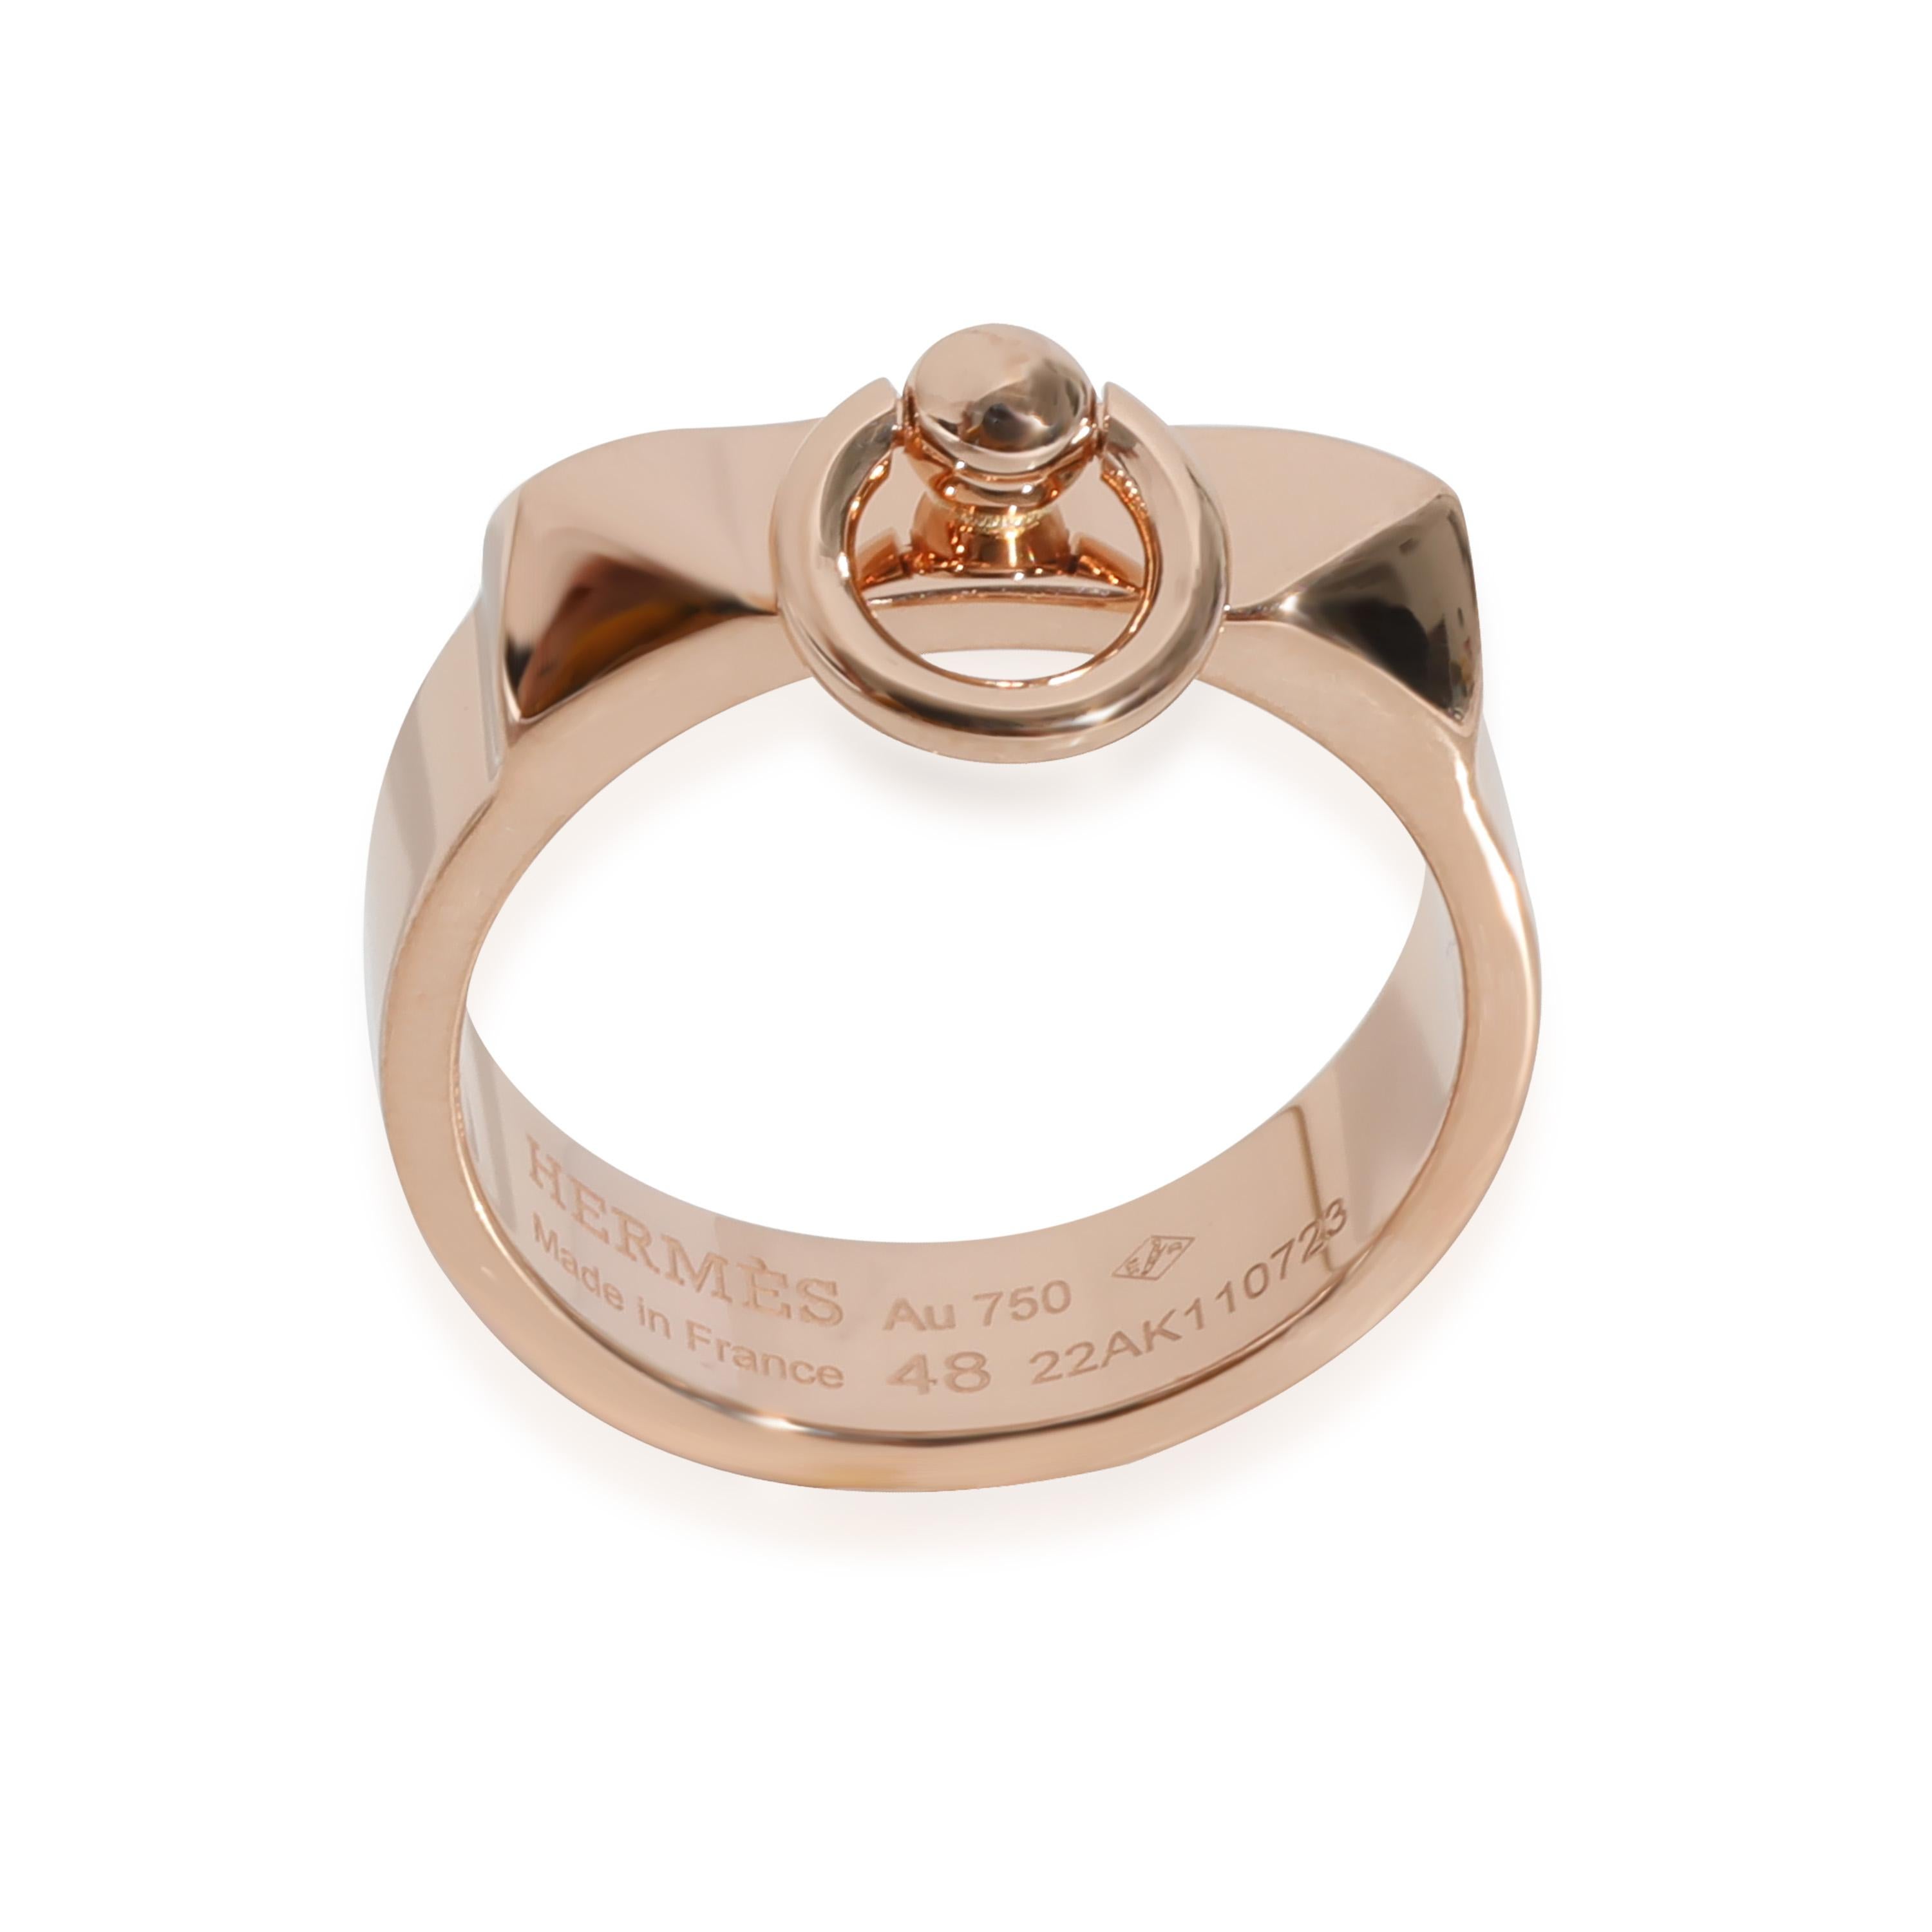 Hermès Collier de Chien Band in 18k Rose Gold

PRIMARY DETAILS
SKU: 128972
Listing Title: Hermès Collier de Chien Band in 18k Rose Gold
Condition Description: Retails for 2025 USD. In excellent condition and recently polished. Ring size is 4.5.